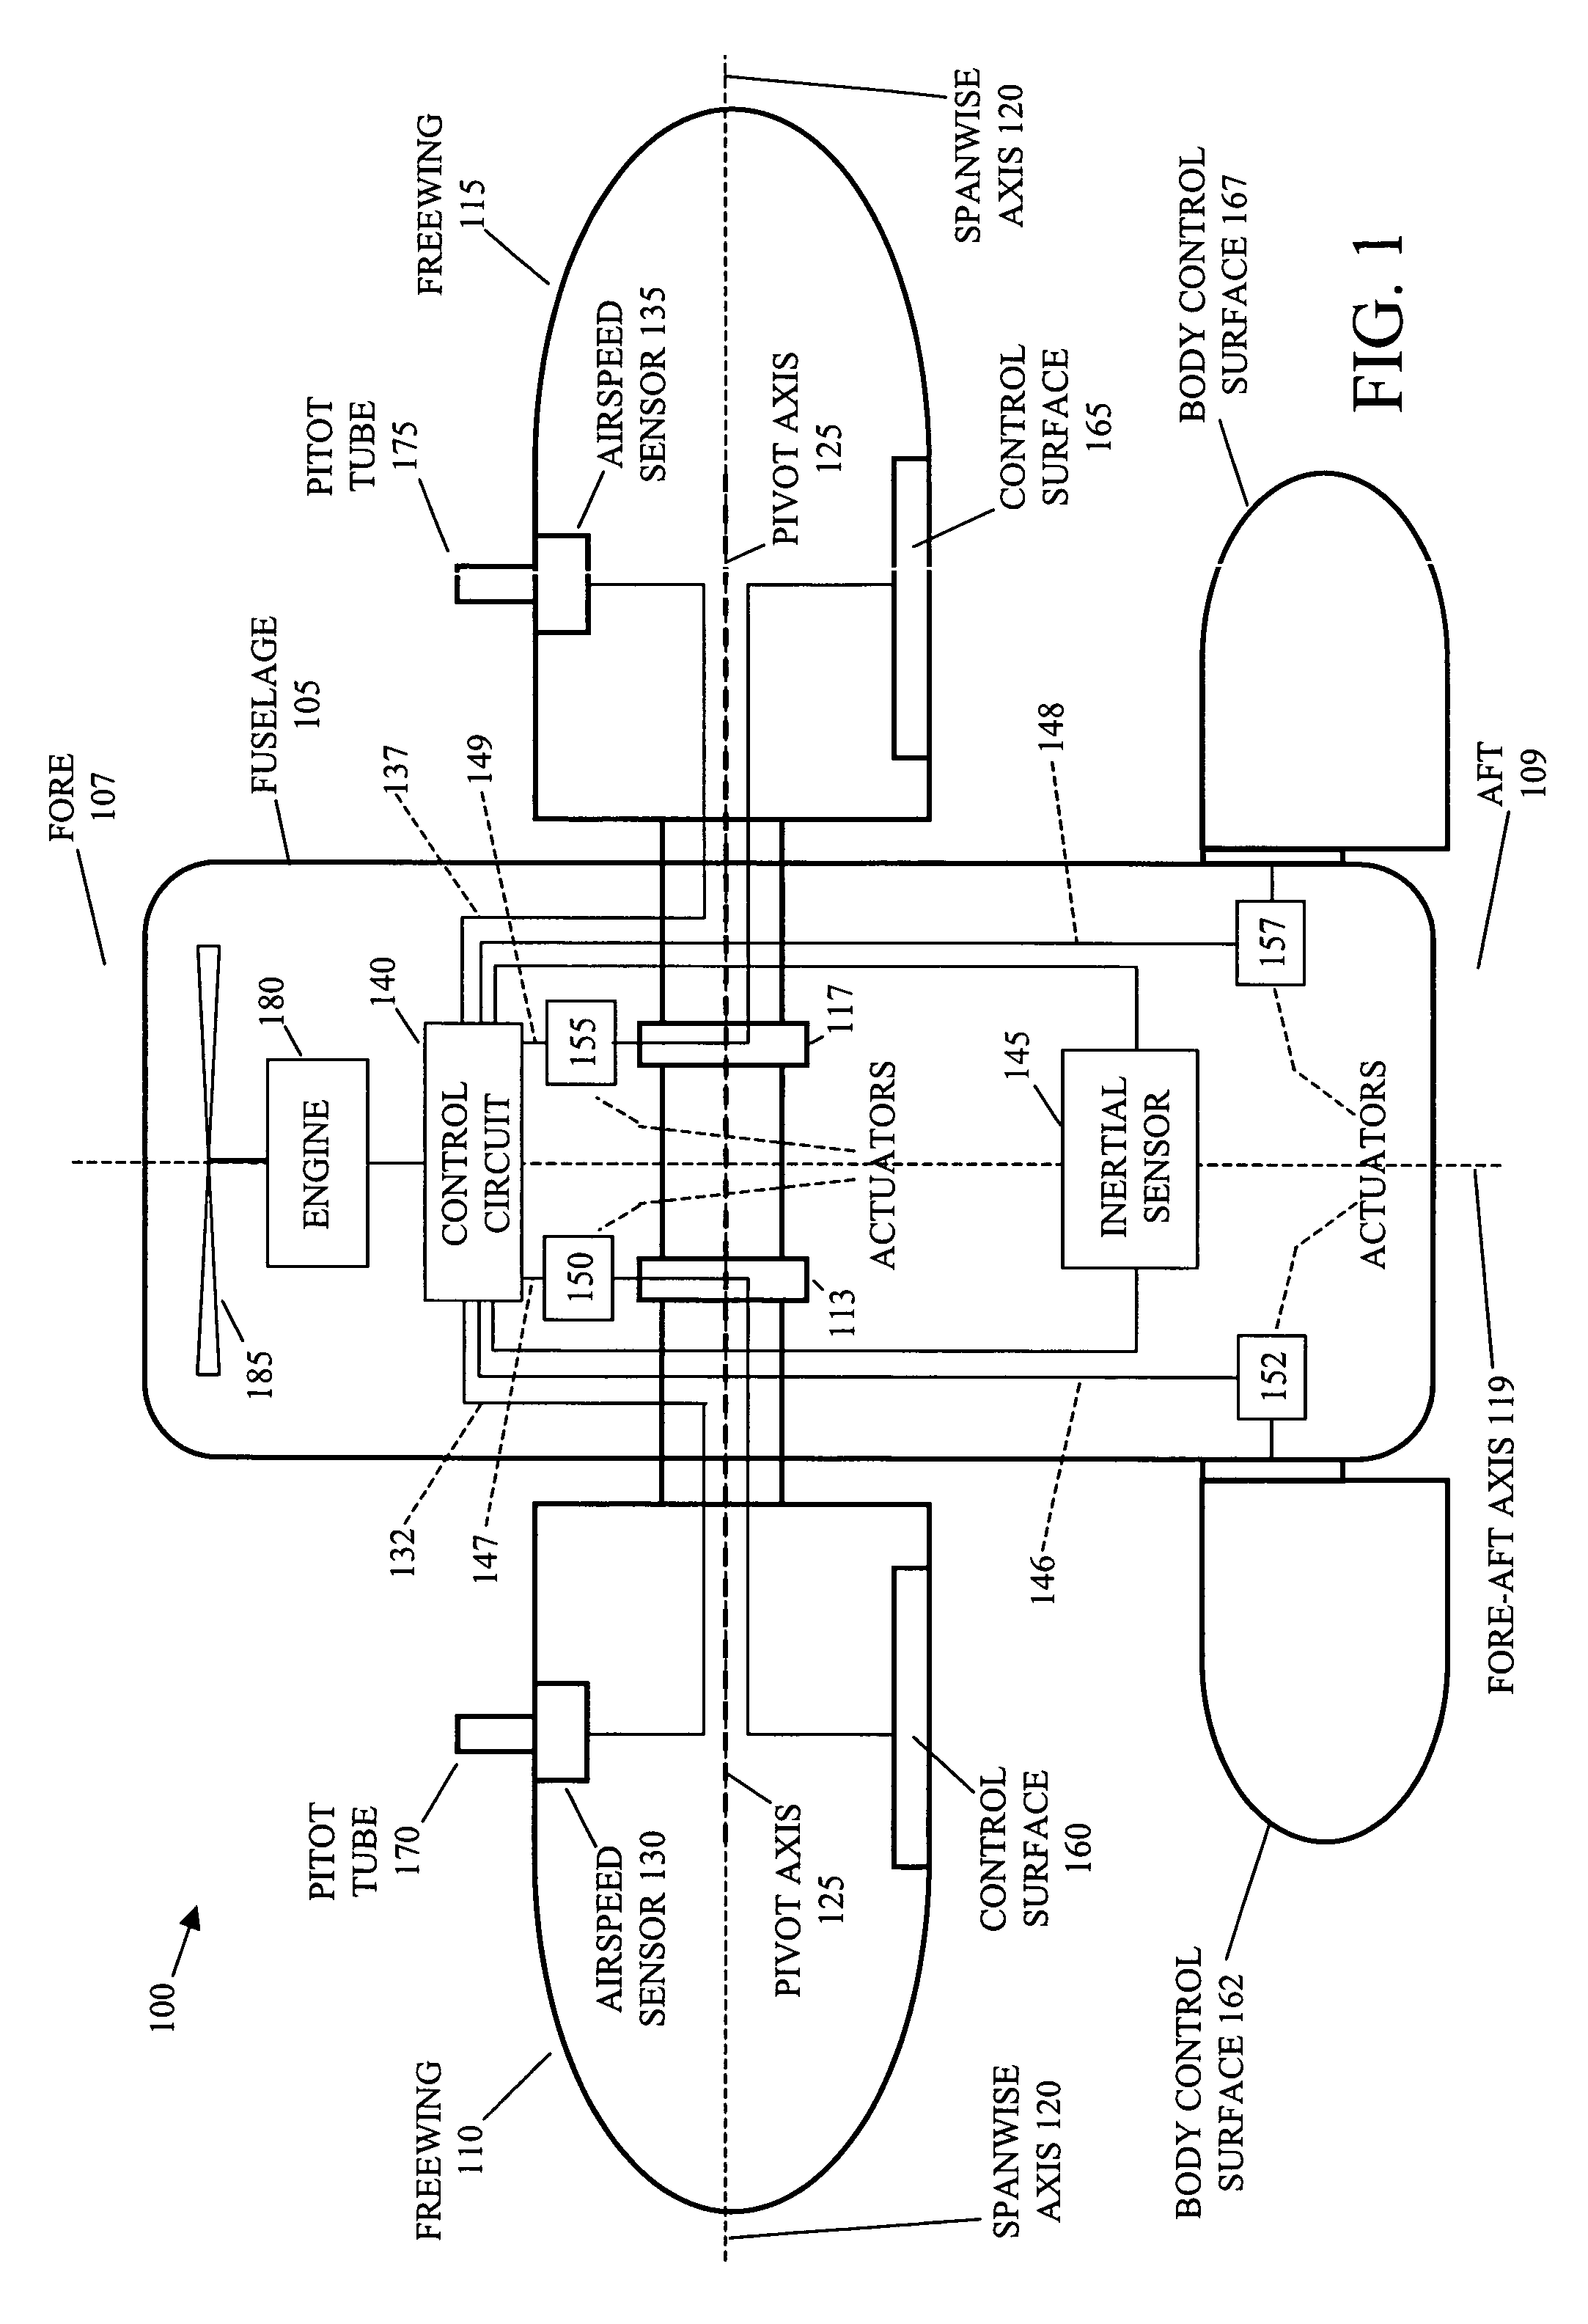 Inbound transition control for a tail-sitting vertical take off and landing aircraft